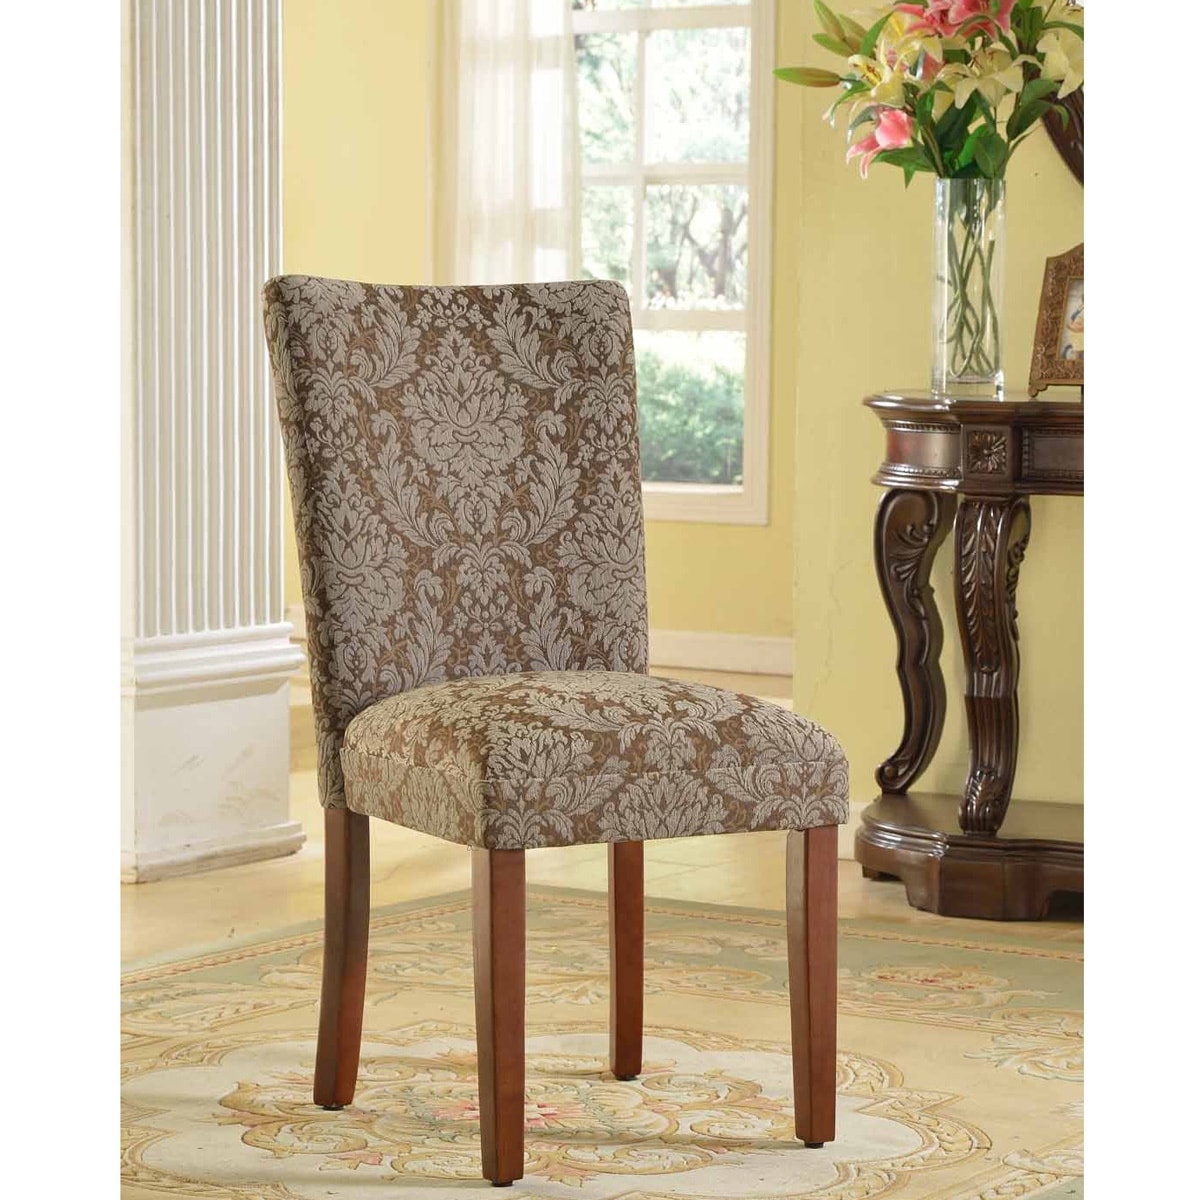 Parson Chairs (Set of 2) Today $159.99 5.0 (10 reviews)